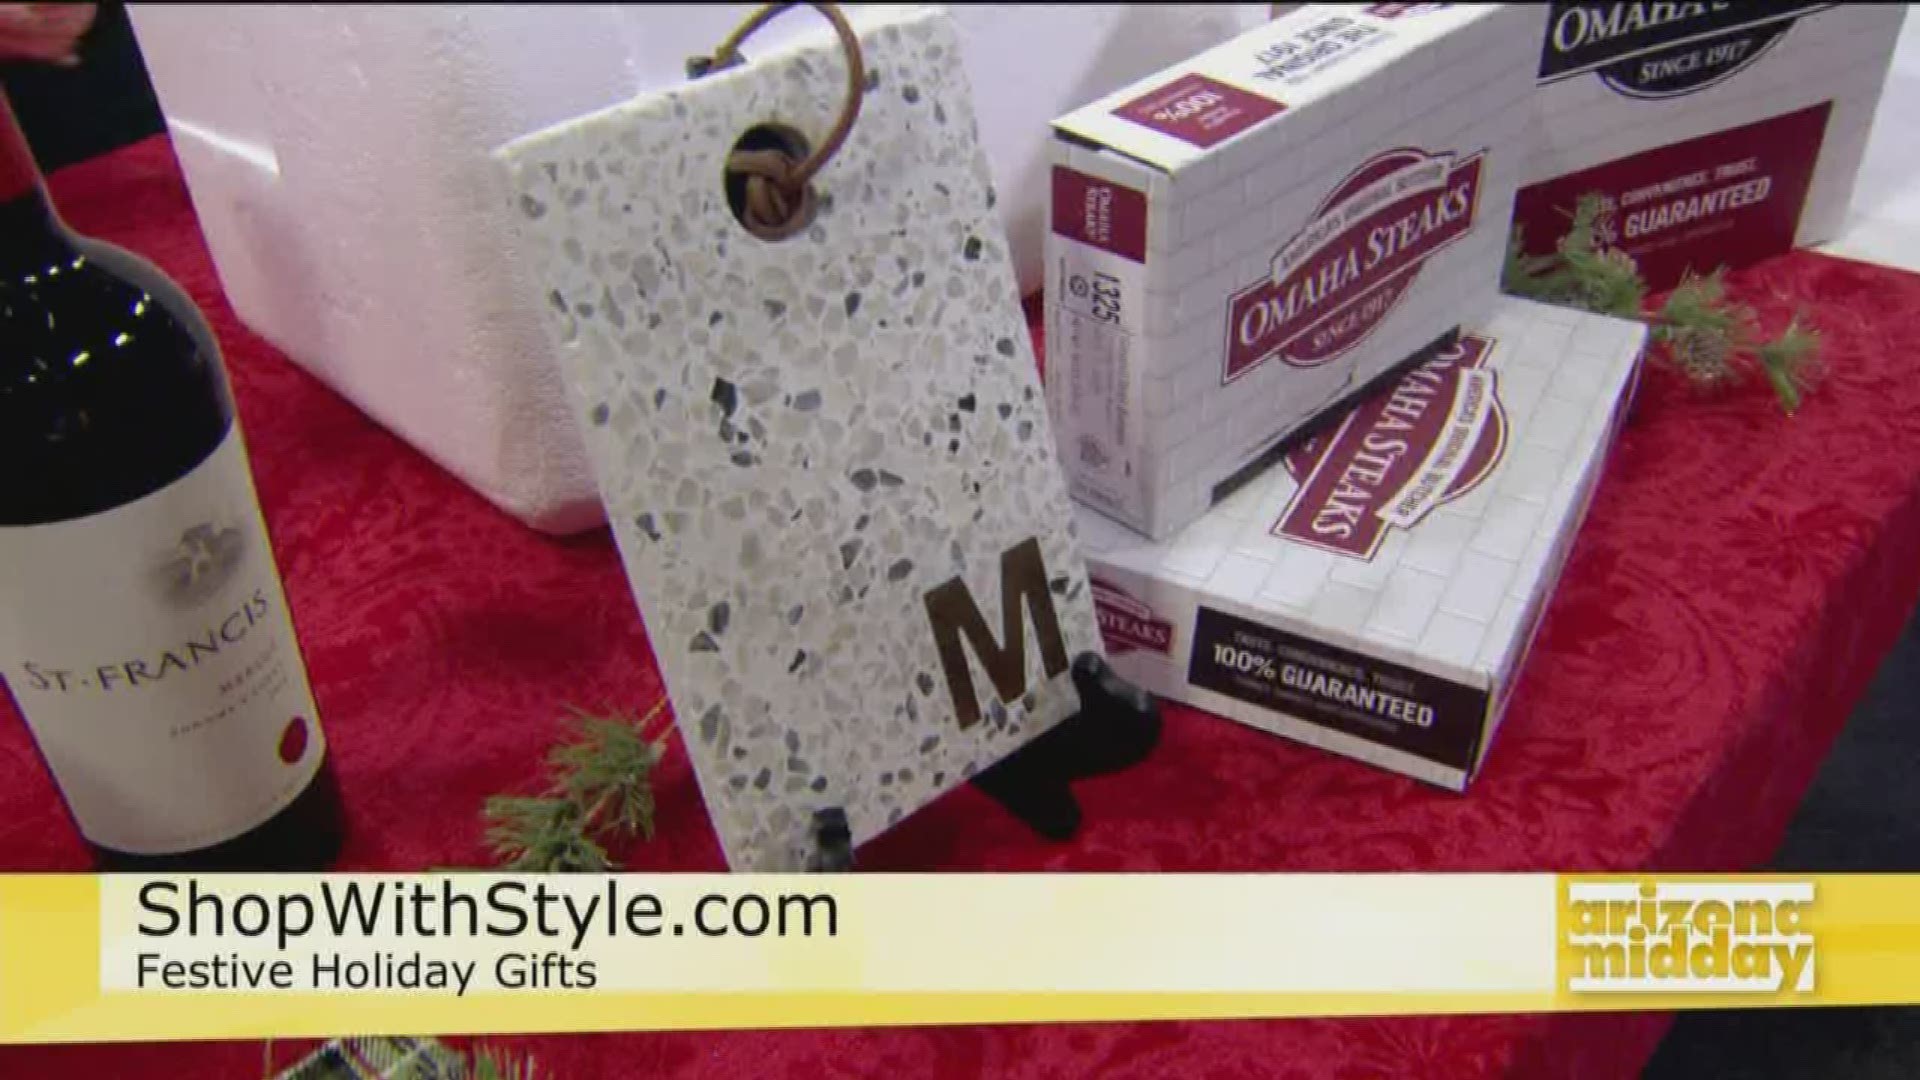 Amy Sewell from Shop With Style gives us top affordable gift ideas from ornaments to delicious eats